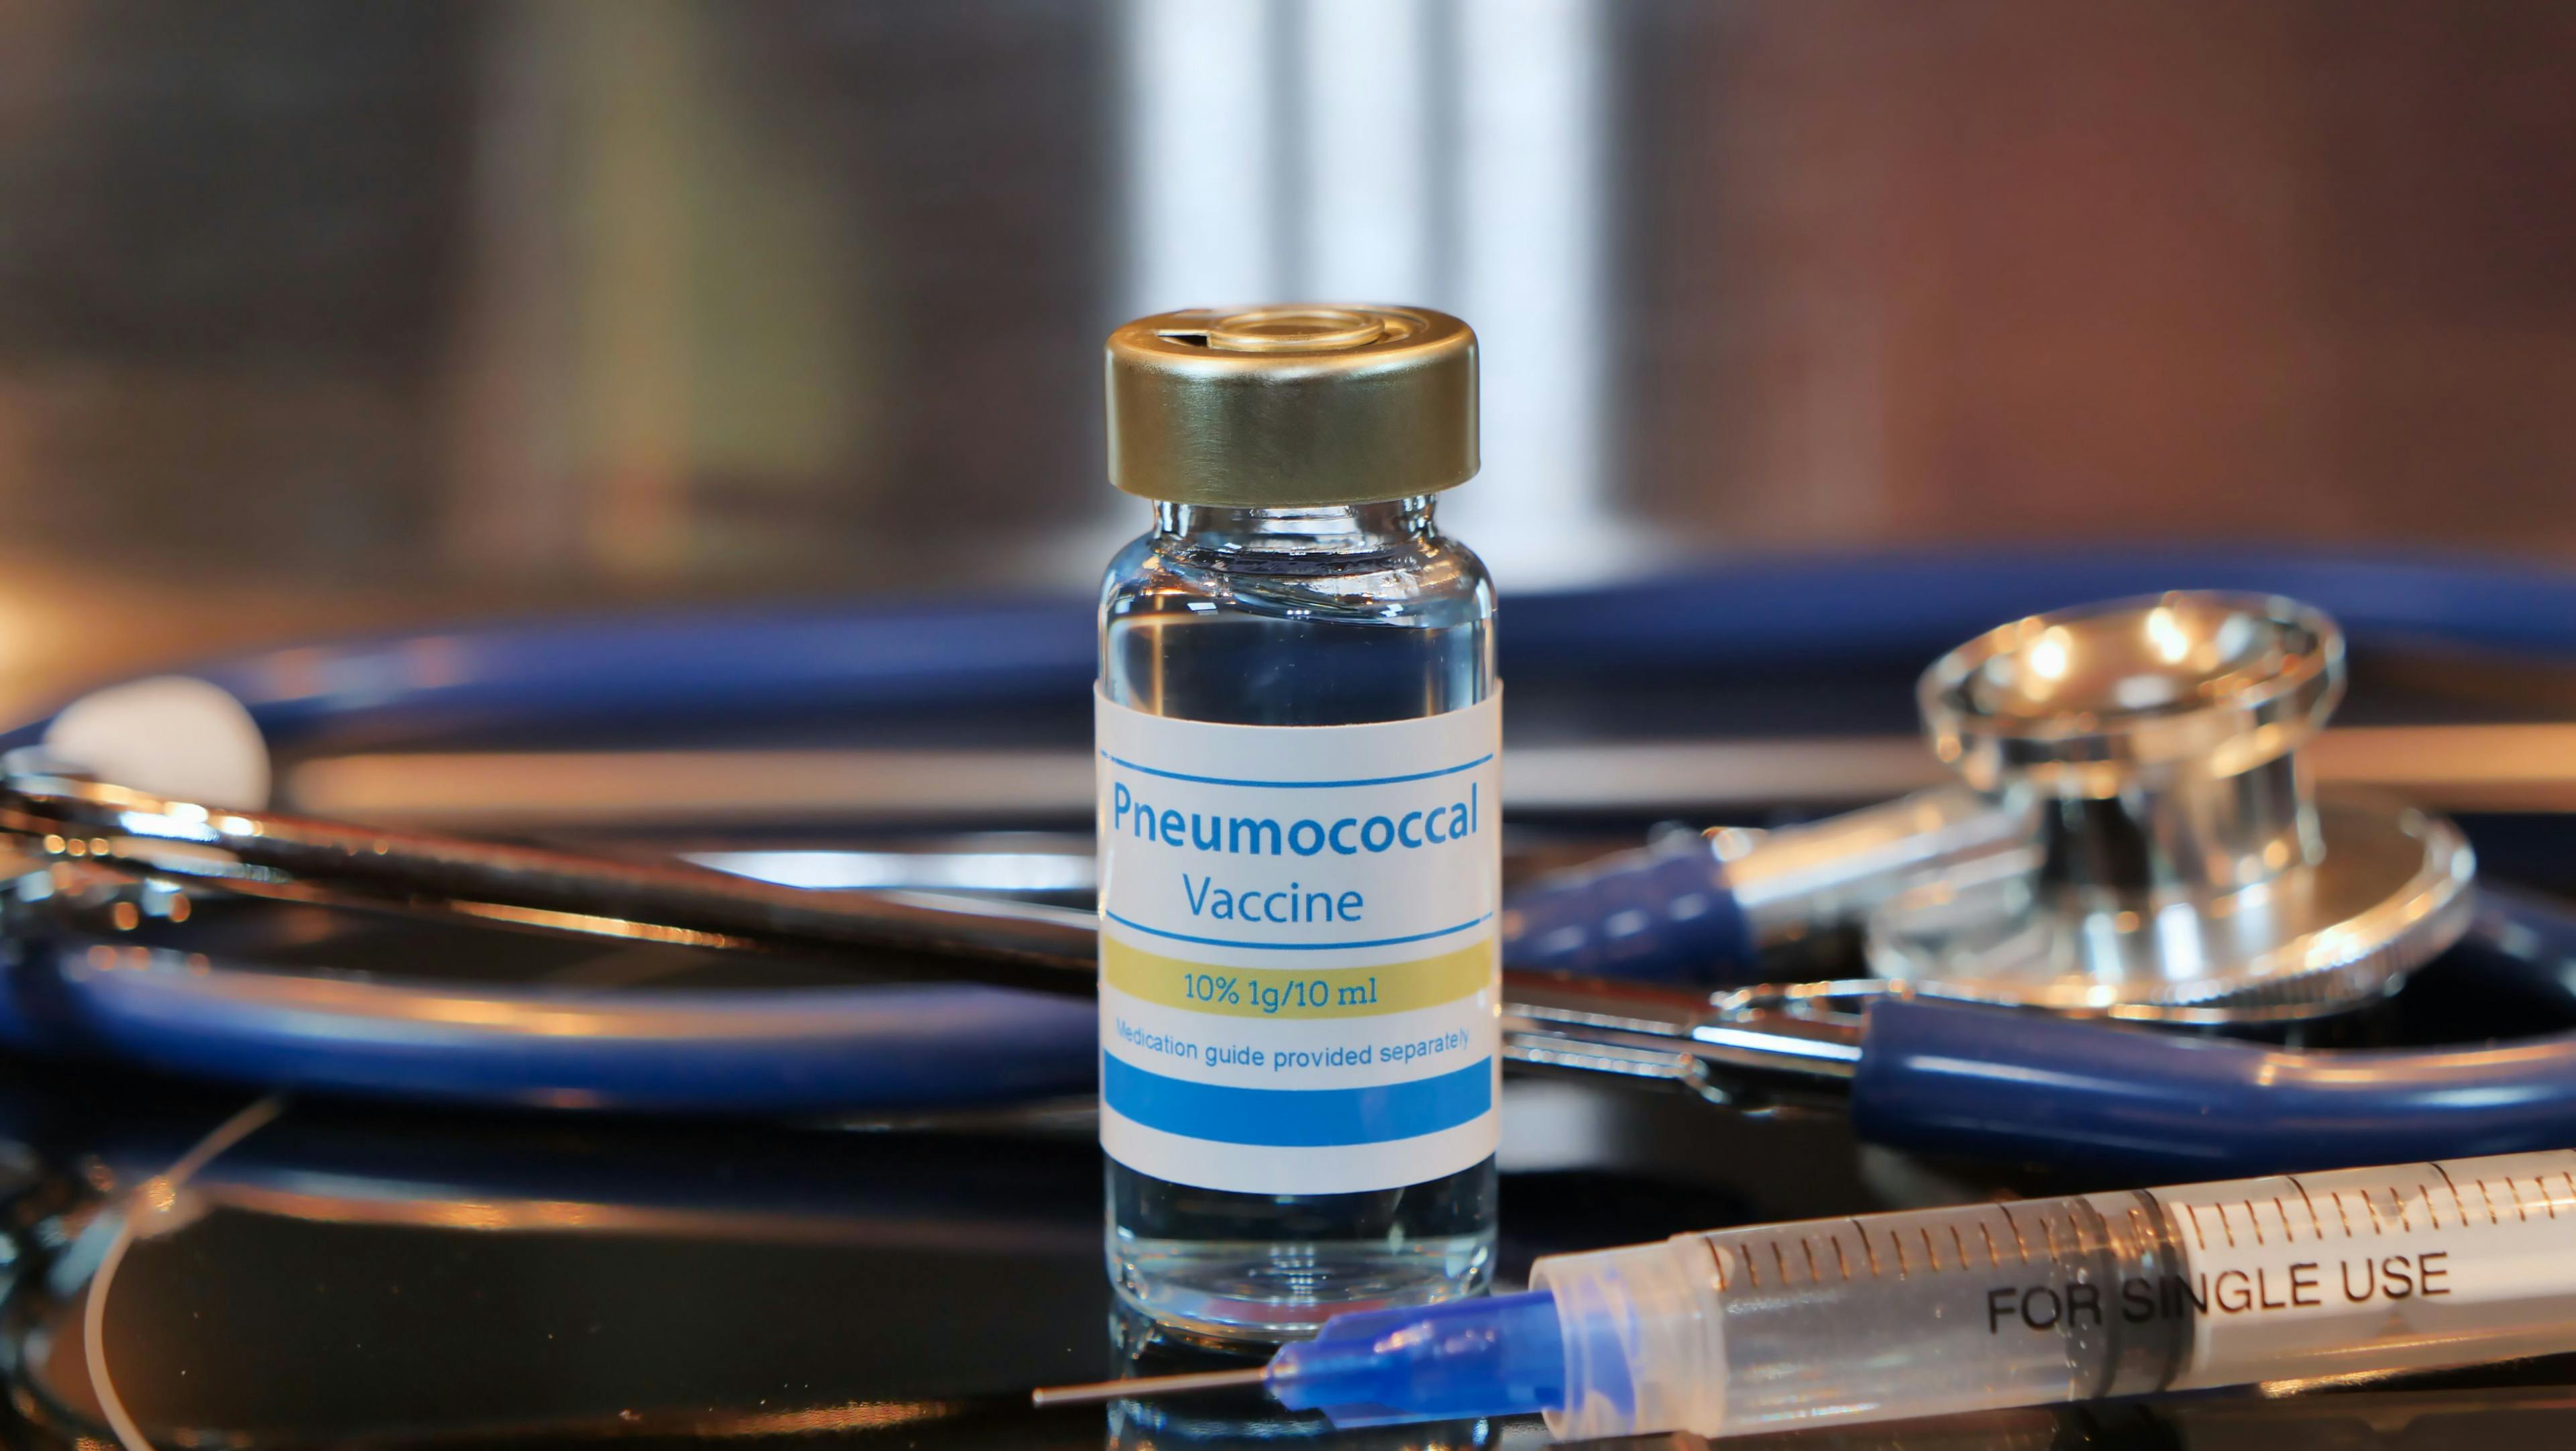 Merck Announces Positive Results From Phase 3 Pneumococcal Vaccine Trials